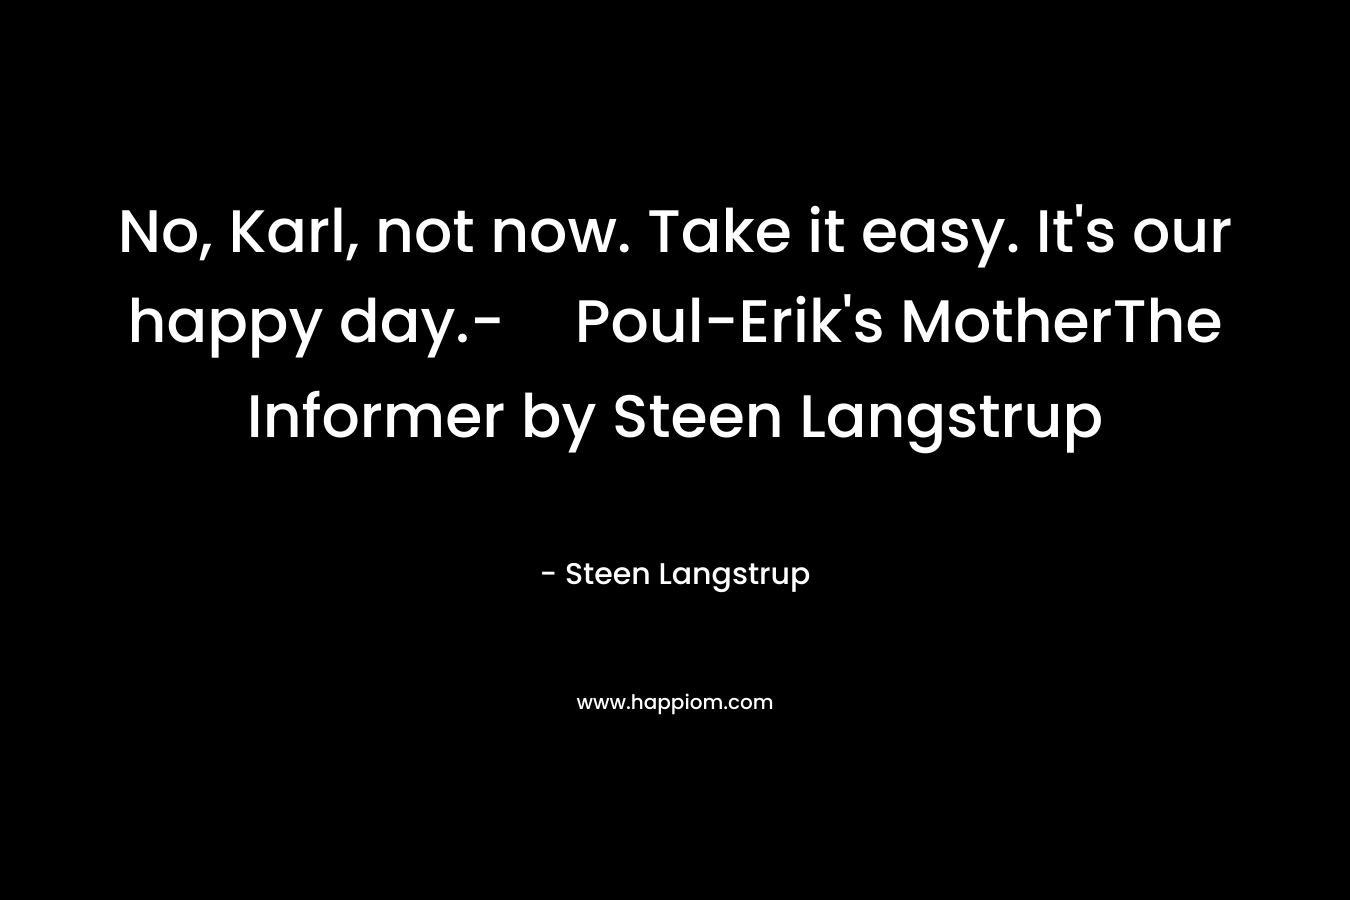 No, Karl, not now. Take it easy. It’s our happy day.-Poul-Erik’s MotherThe Informer by Steen Langstrup – Steen Langstrup